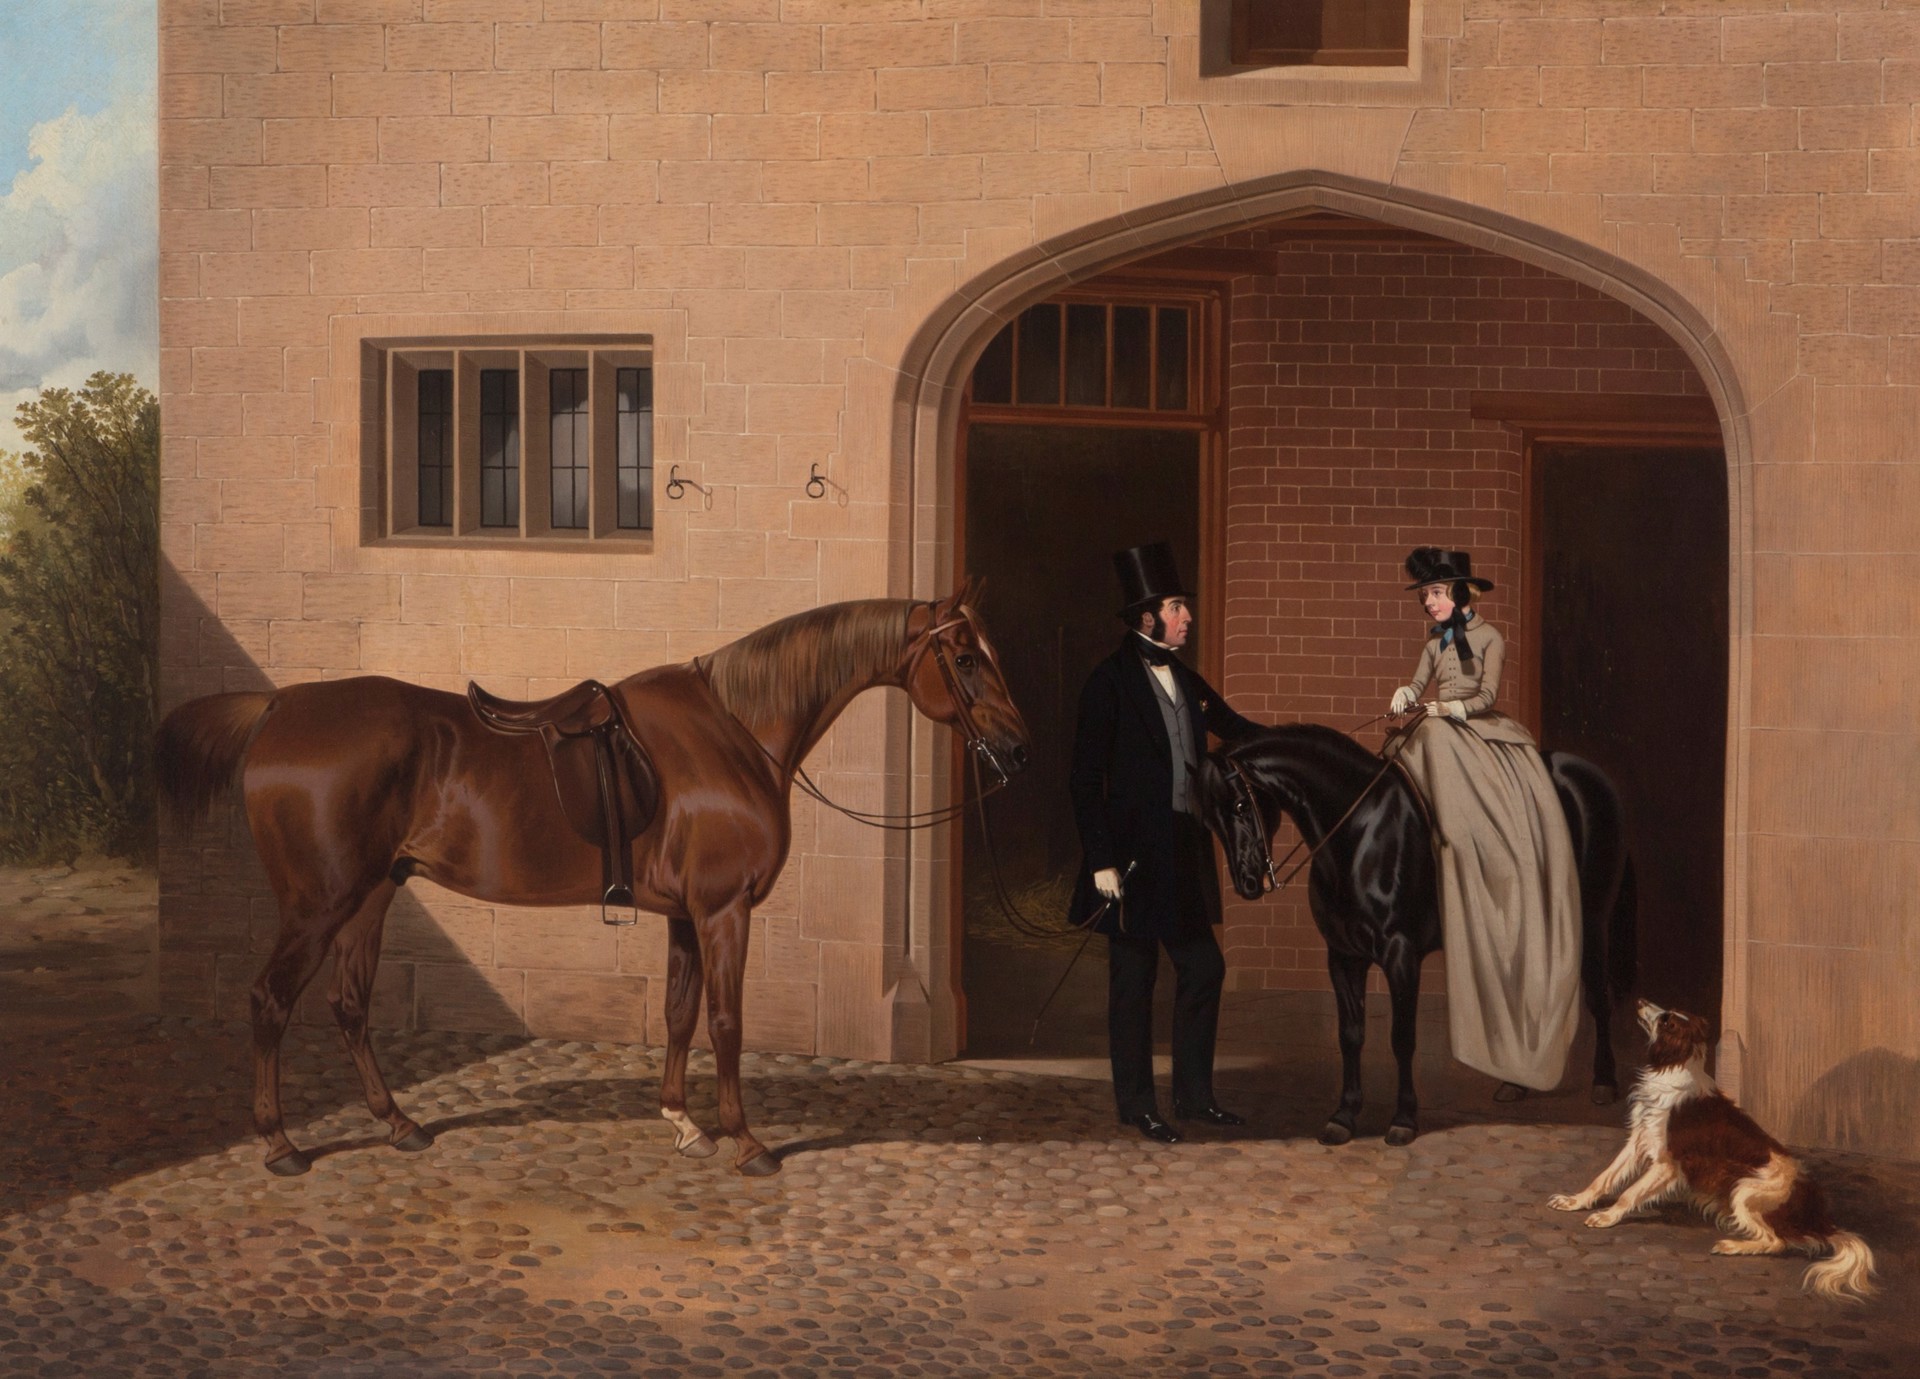 Preparing for the Morning Ride by John Dalby